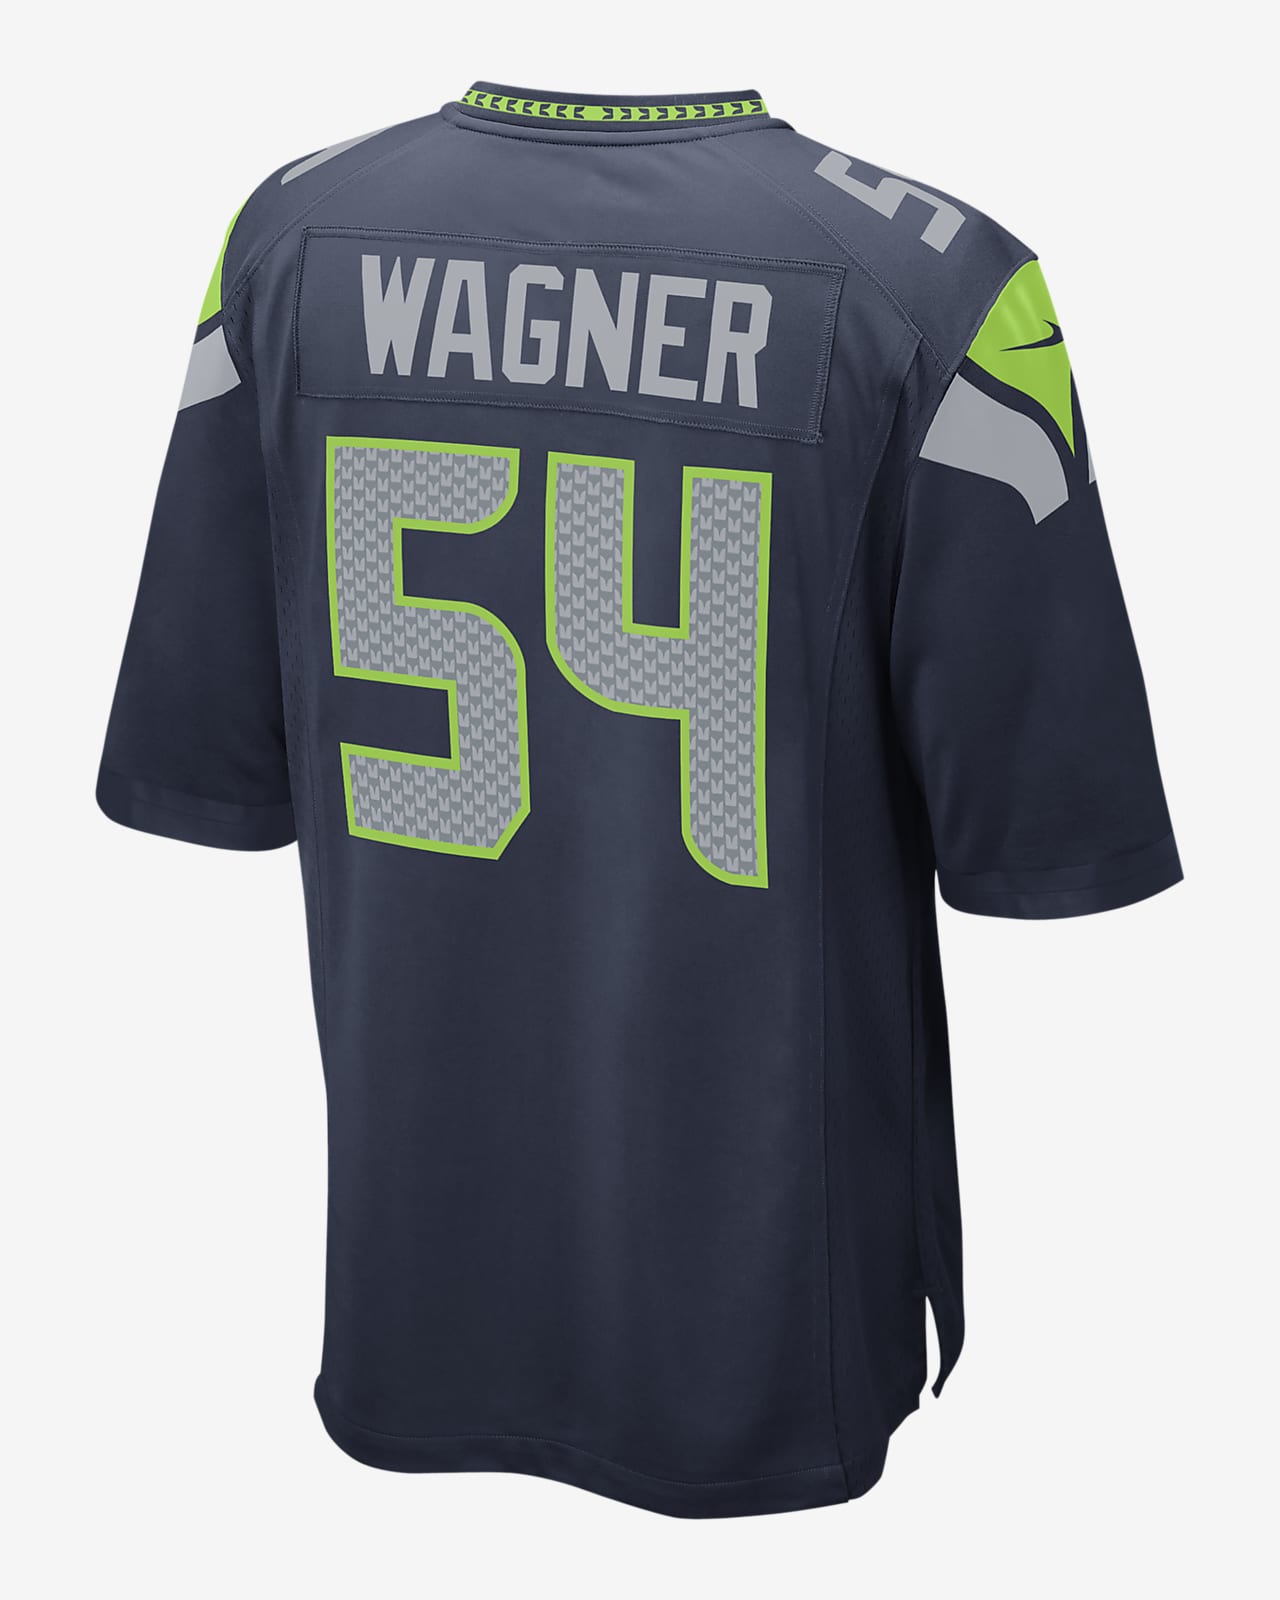 which seahawks jersey should i buy